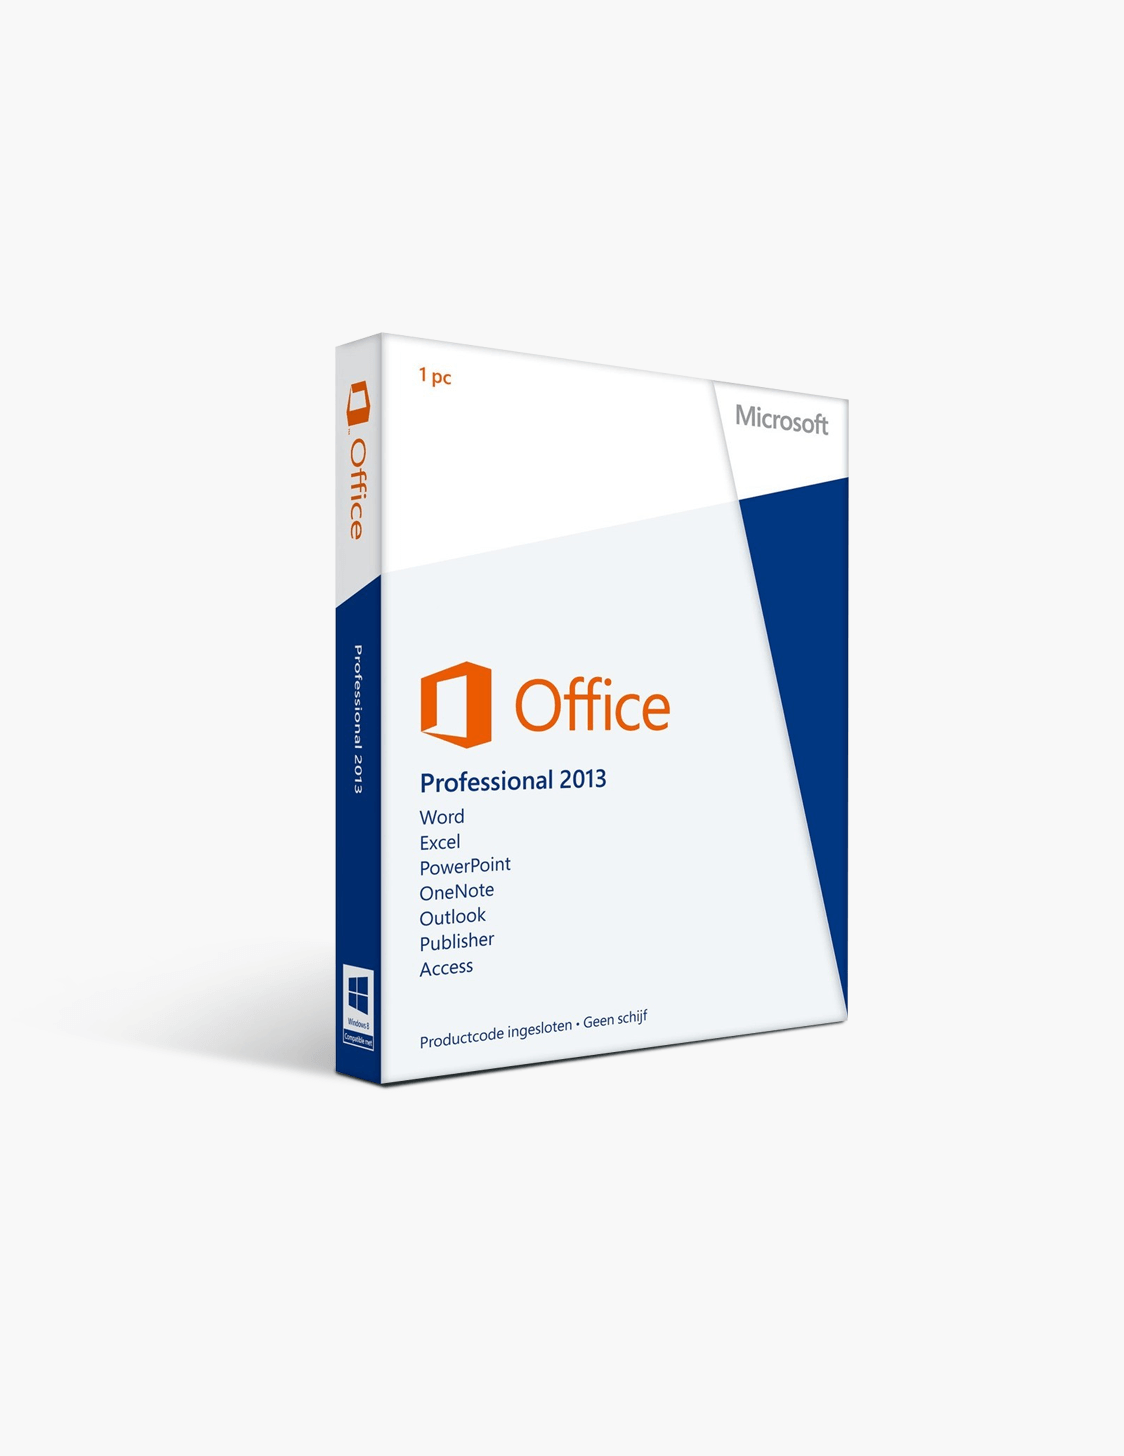 microsoft office professional plus 2013 with product key free download